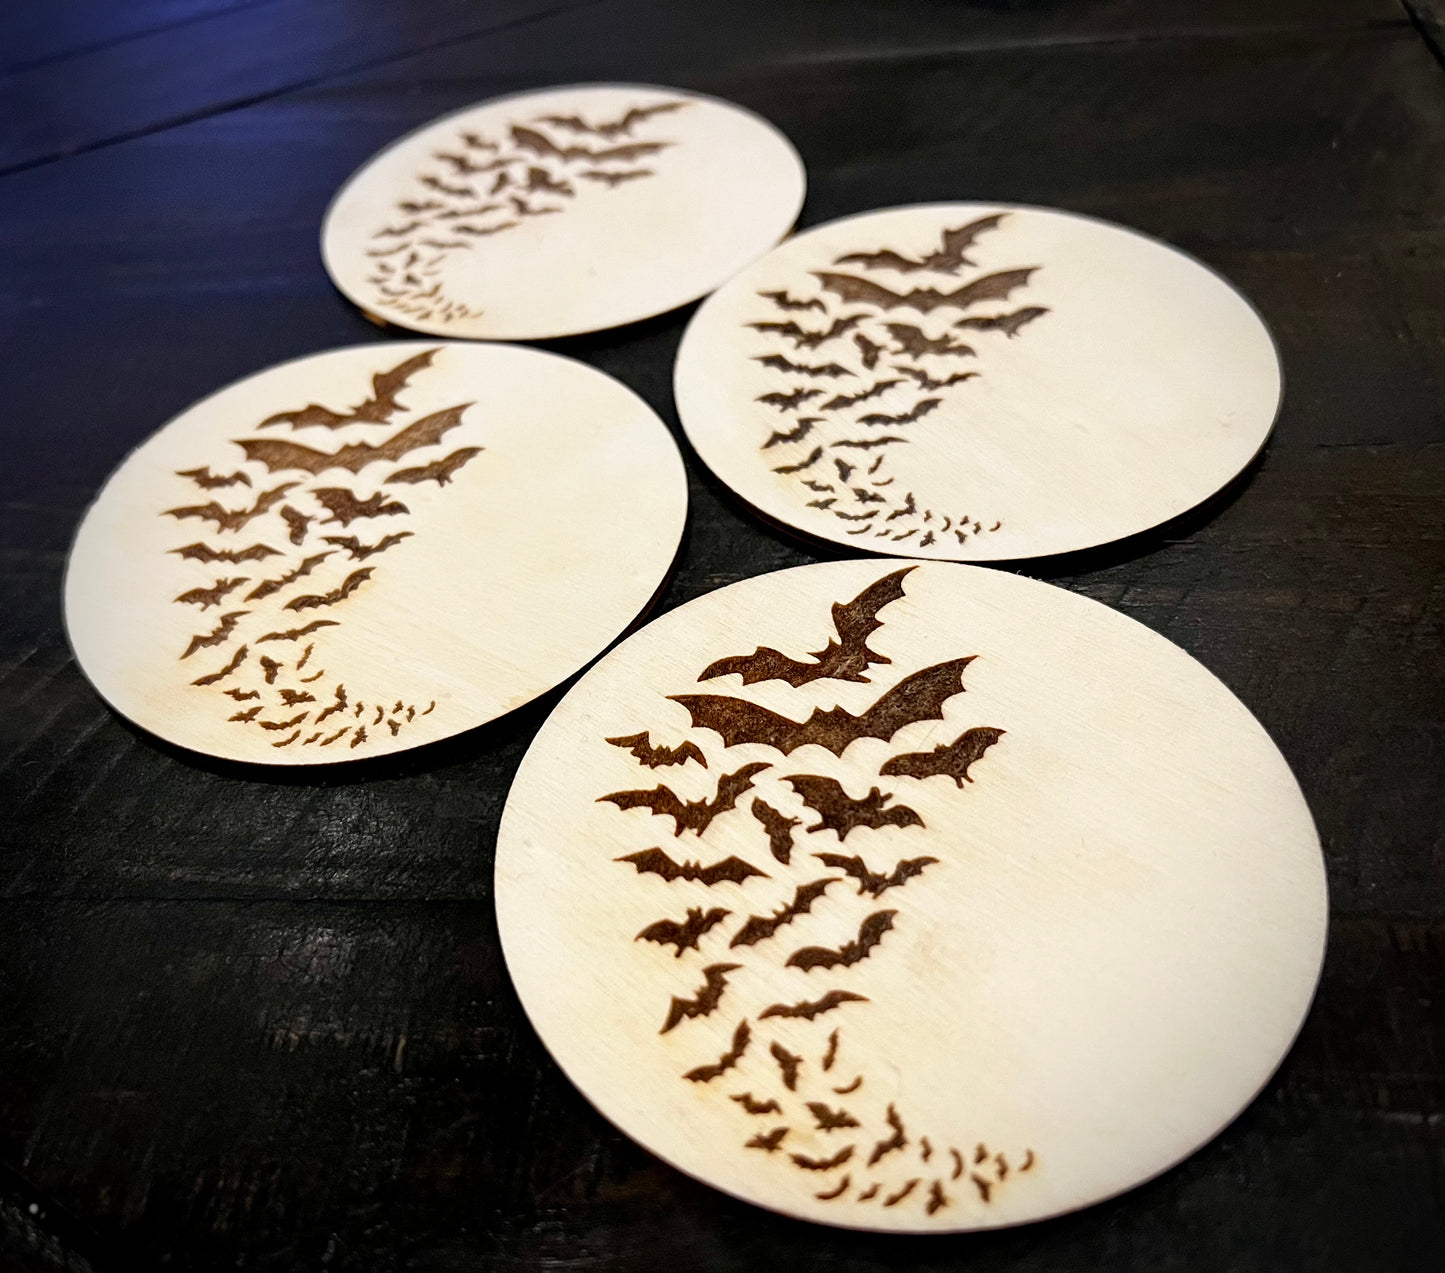 Coasters - Bats! Engraved on Wood with Cork backing (set of 4)